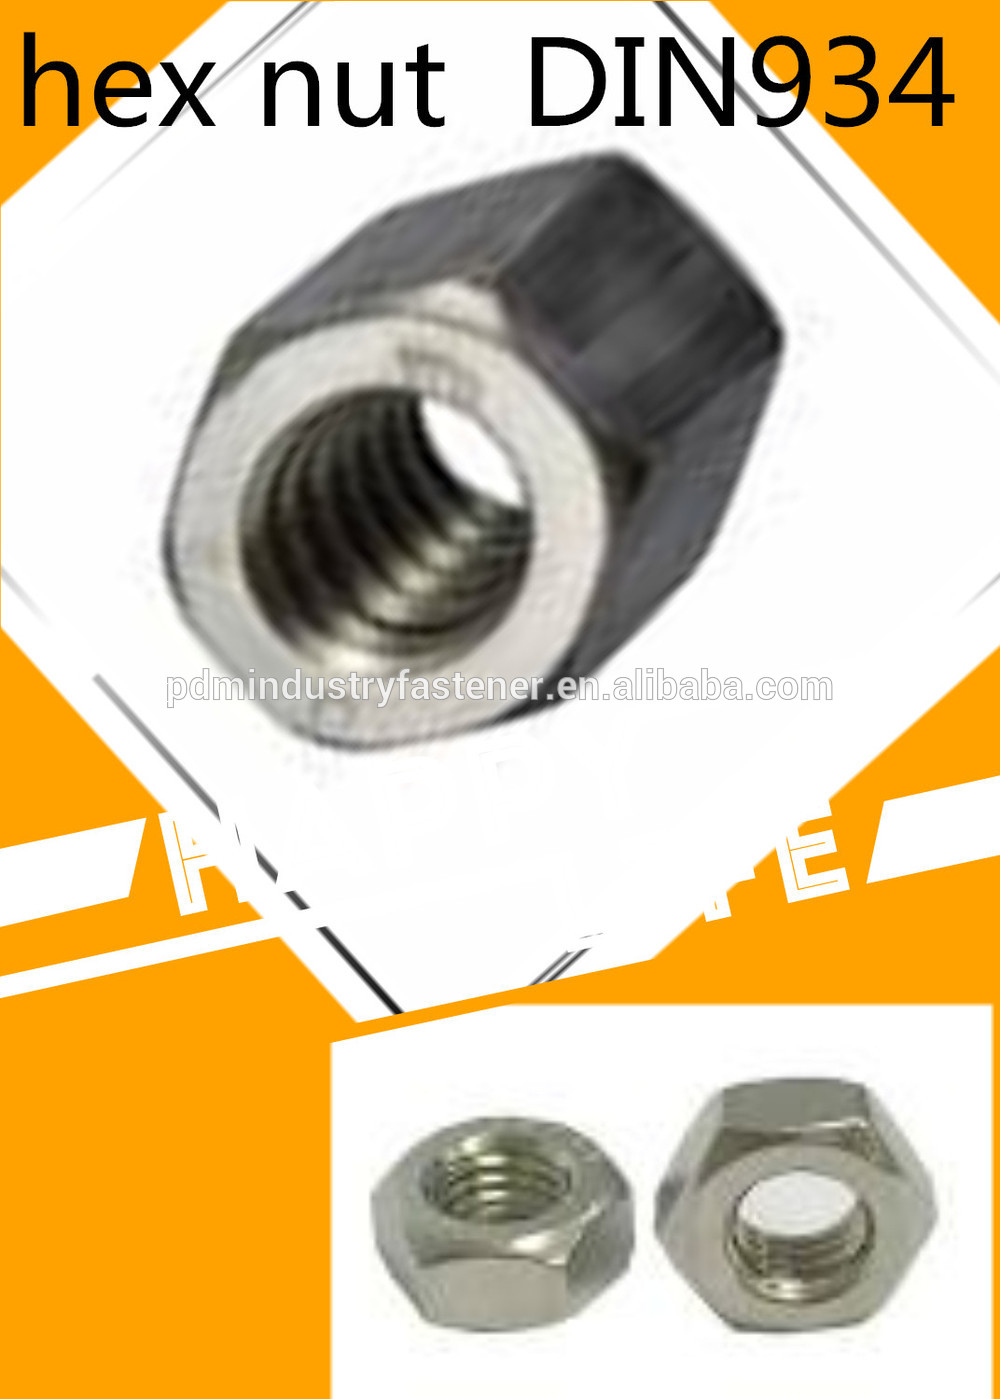 DIN934 hexagon nut with metric coarse and fine pitch thread